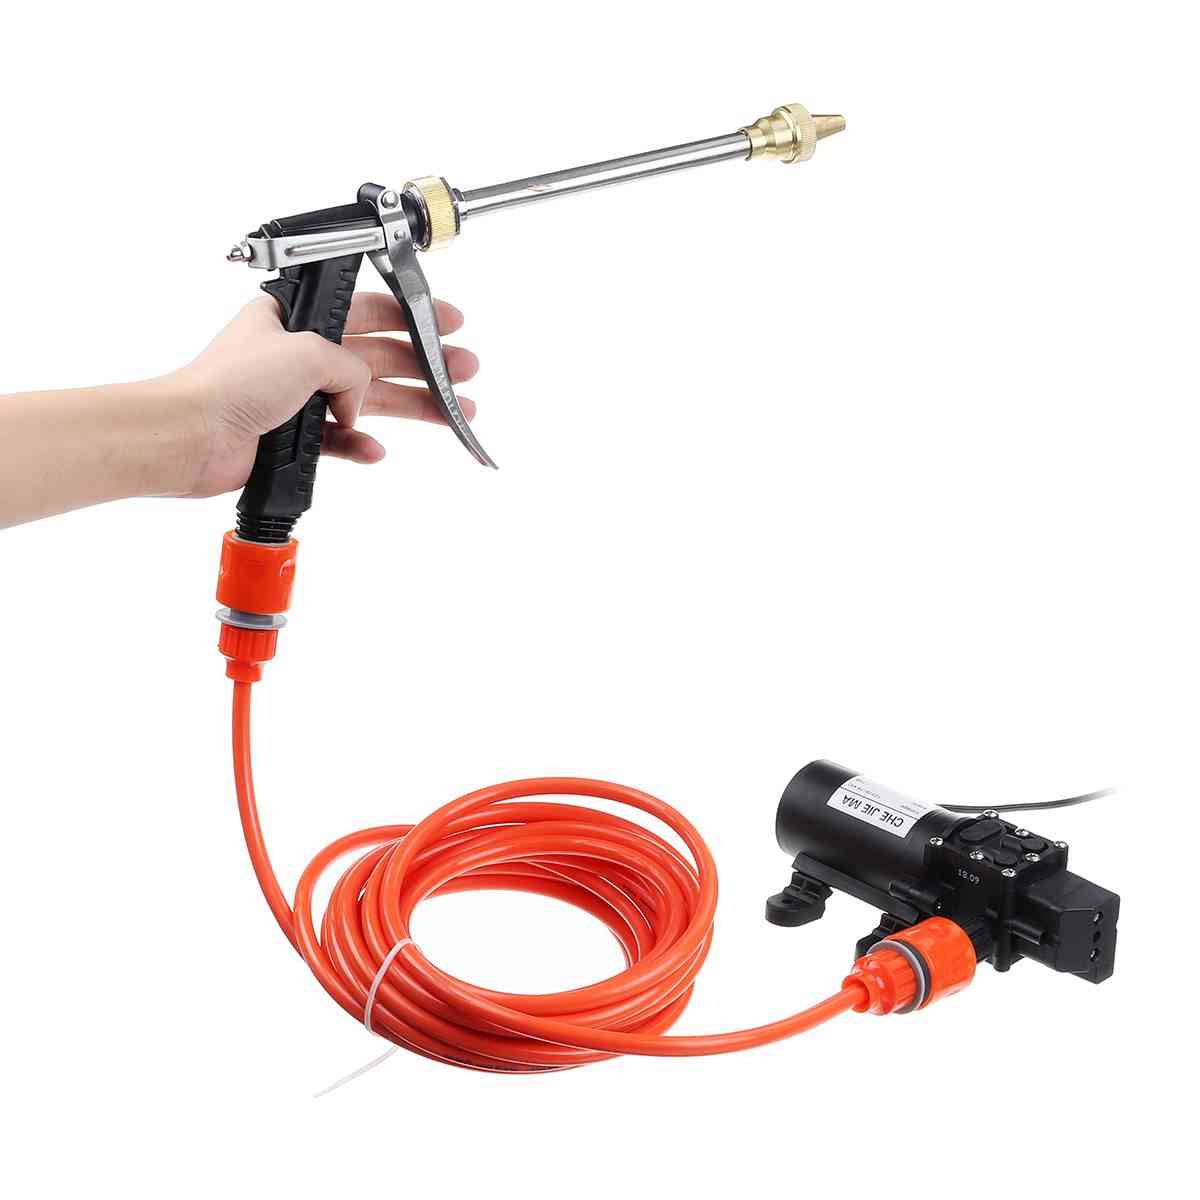 Car Electric Wash Pump Sprayer Kit, Auto Washer Cleaning Machine Set With Charger